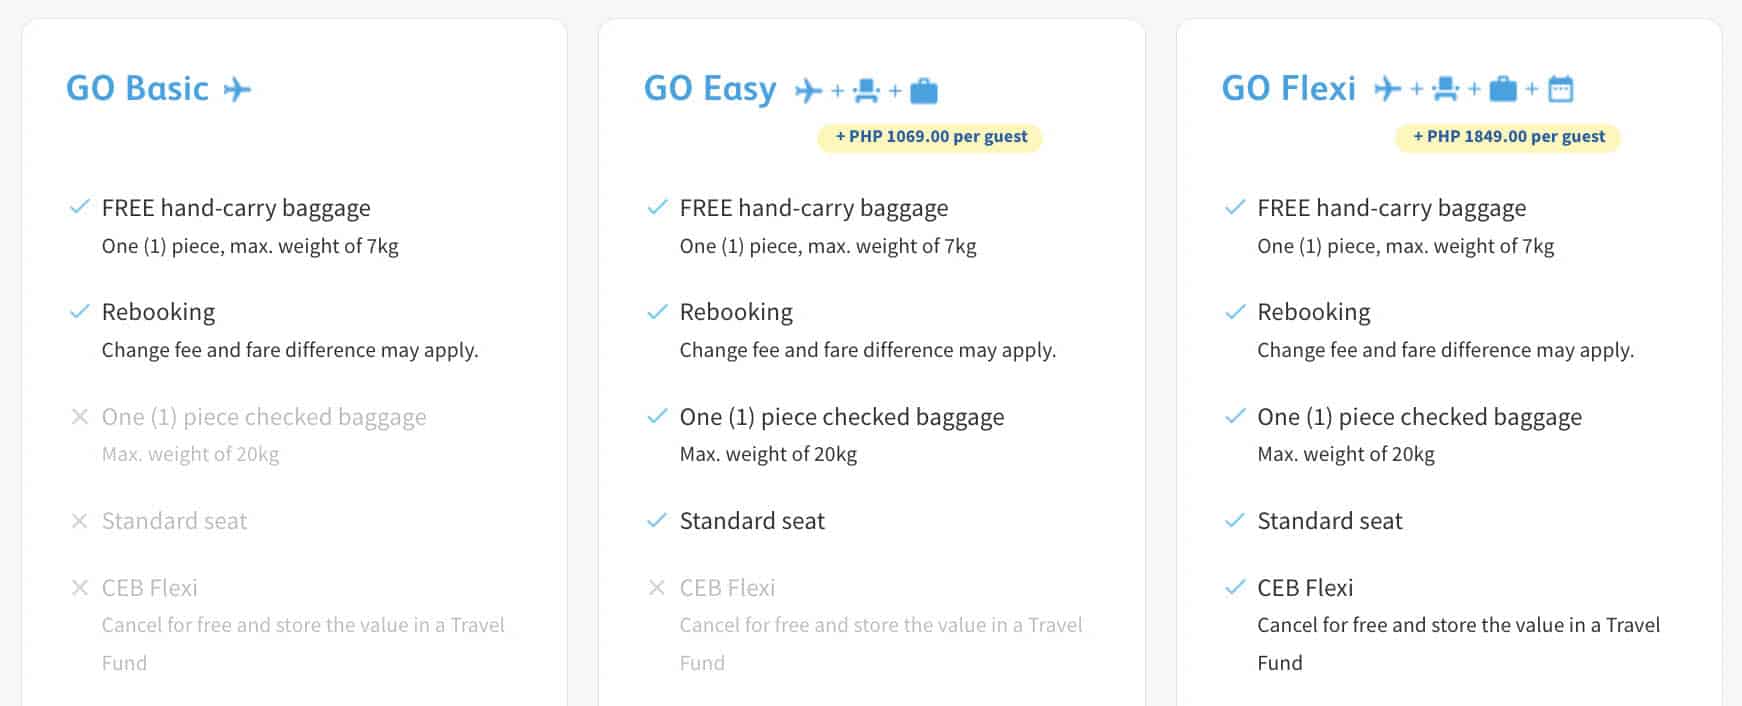 Cebu Pacific GO Packages